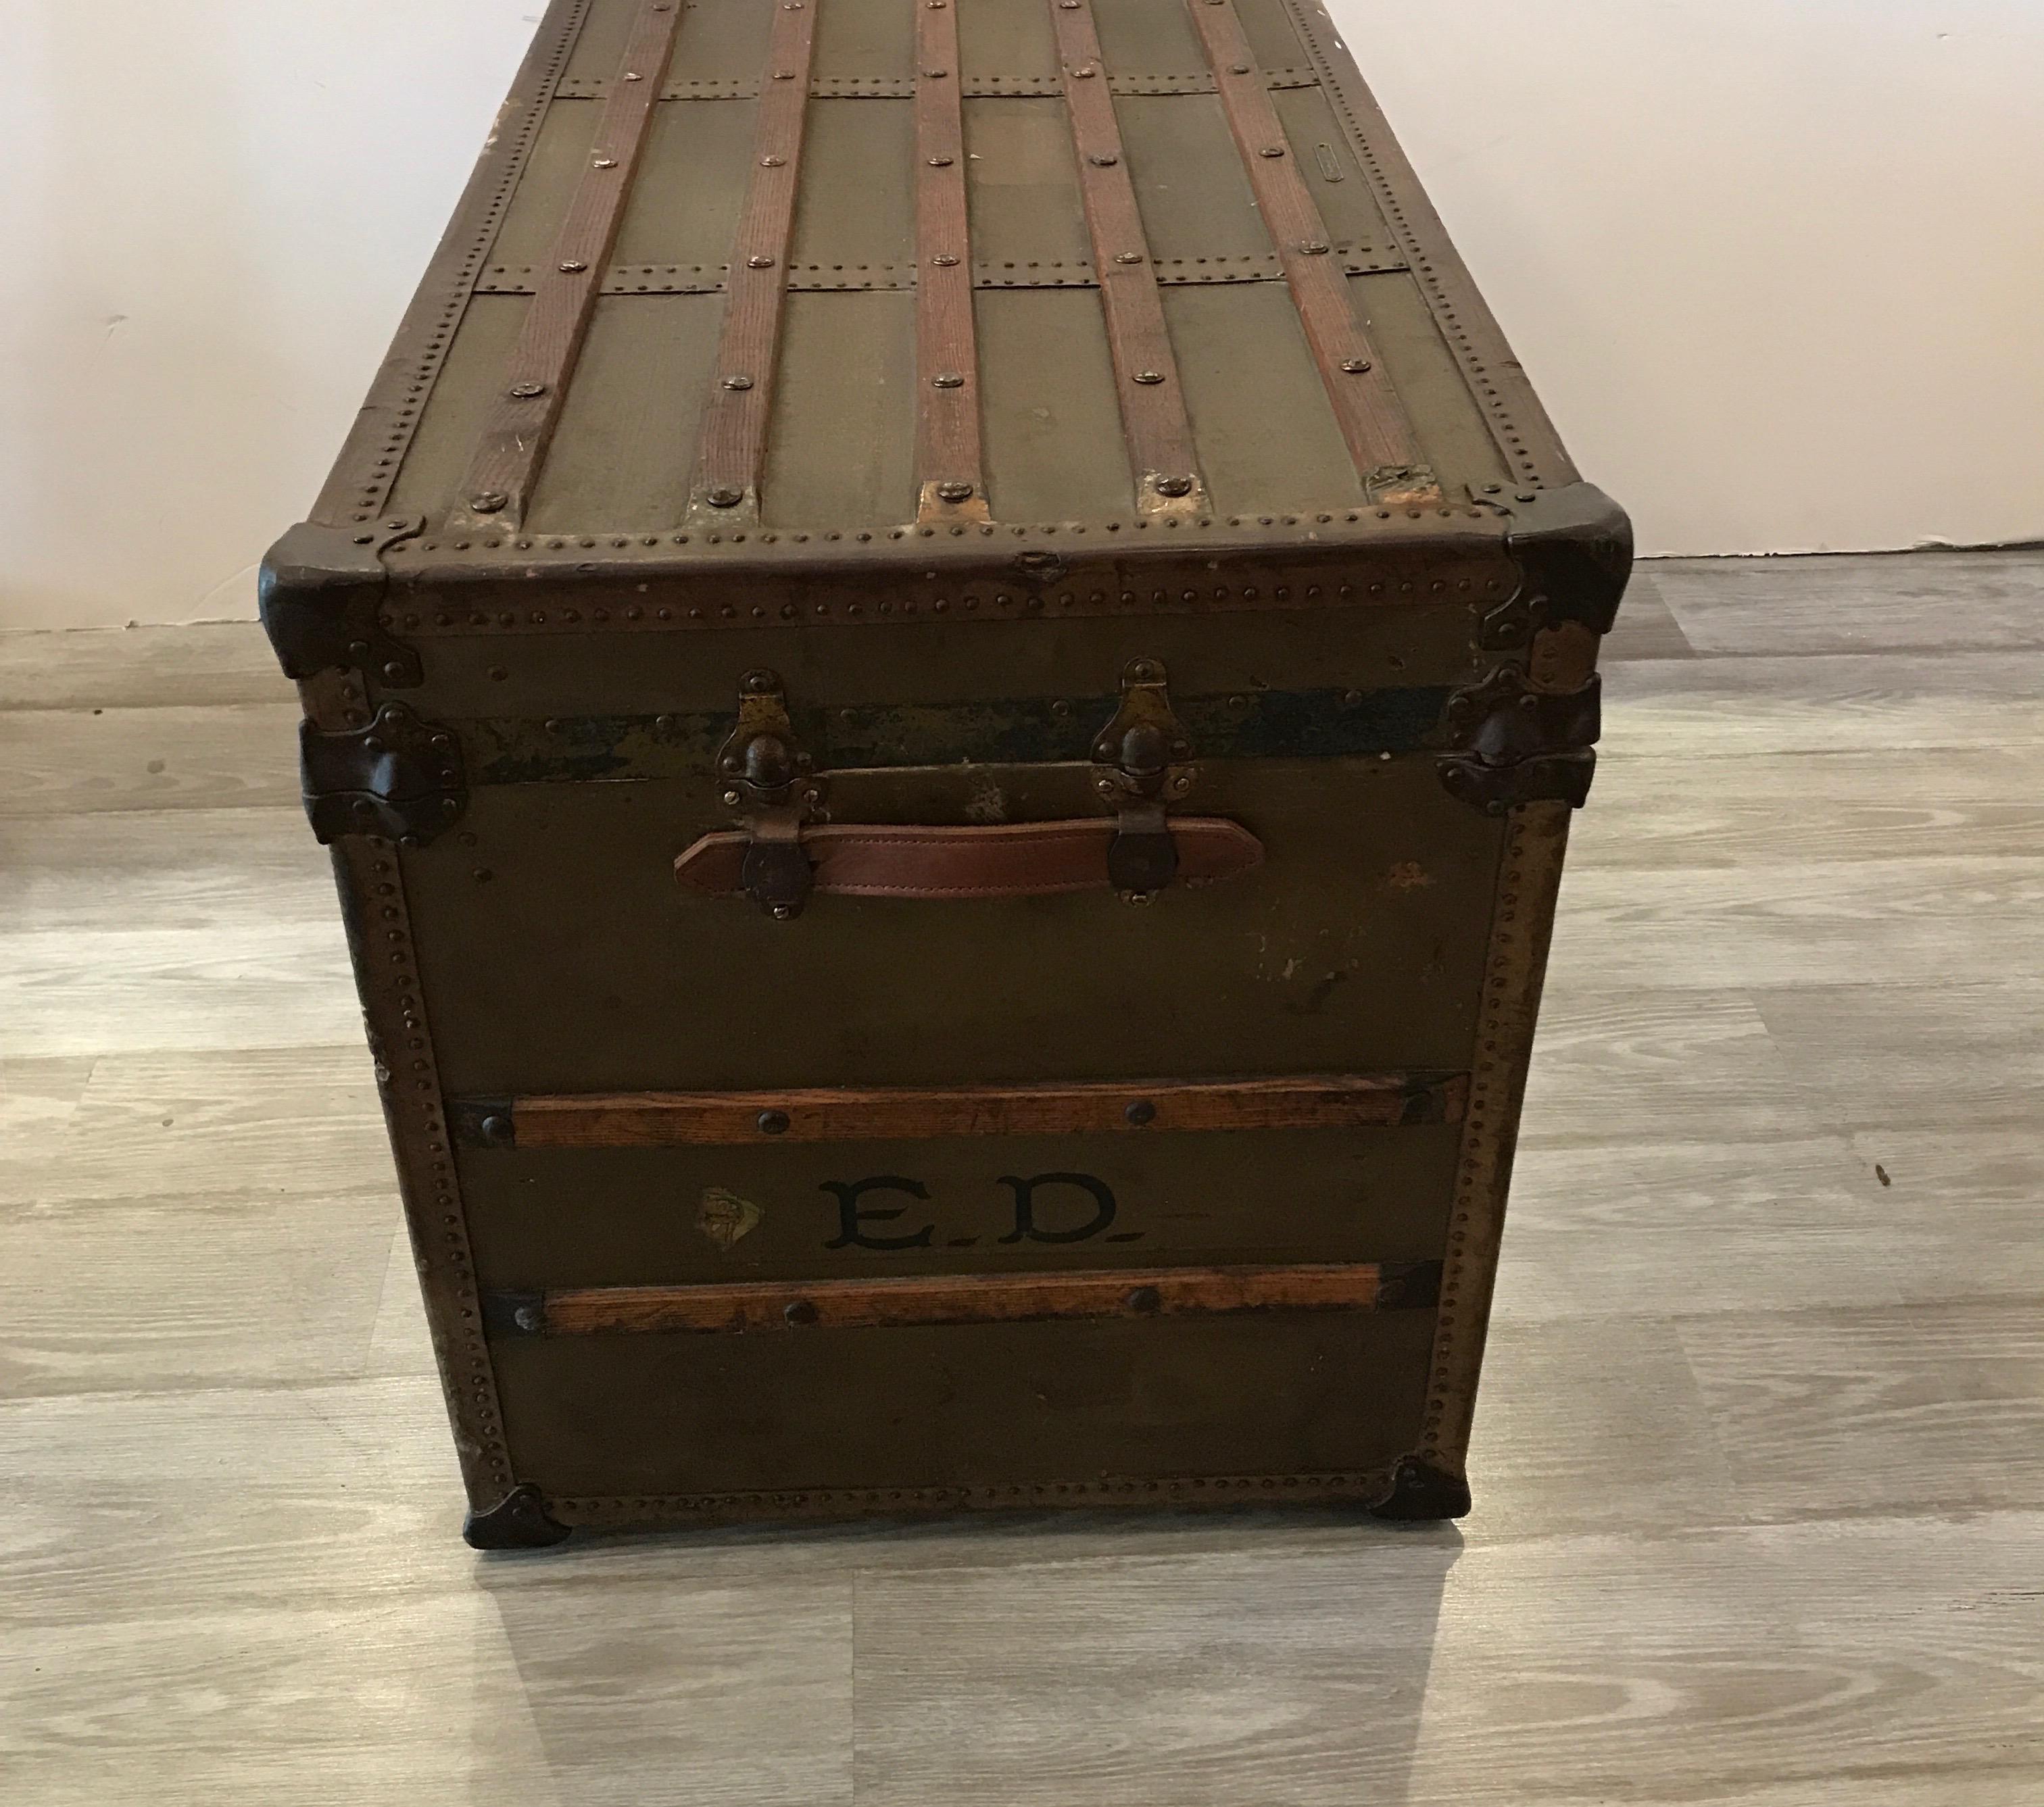 North American Antique Steamer Trunk with Inside Tray and Compartments, circa 1890